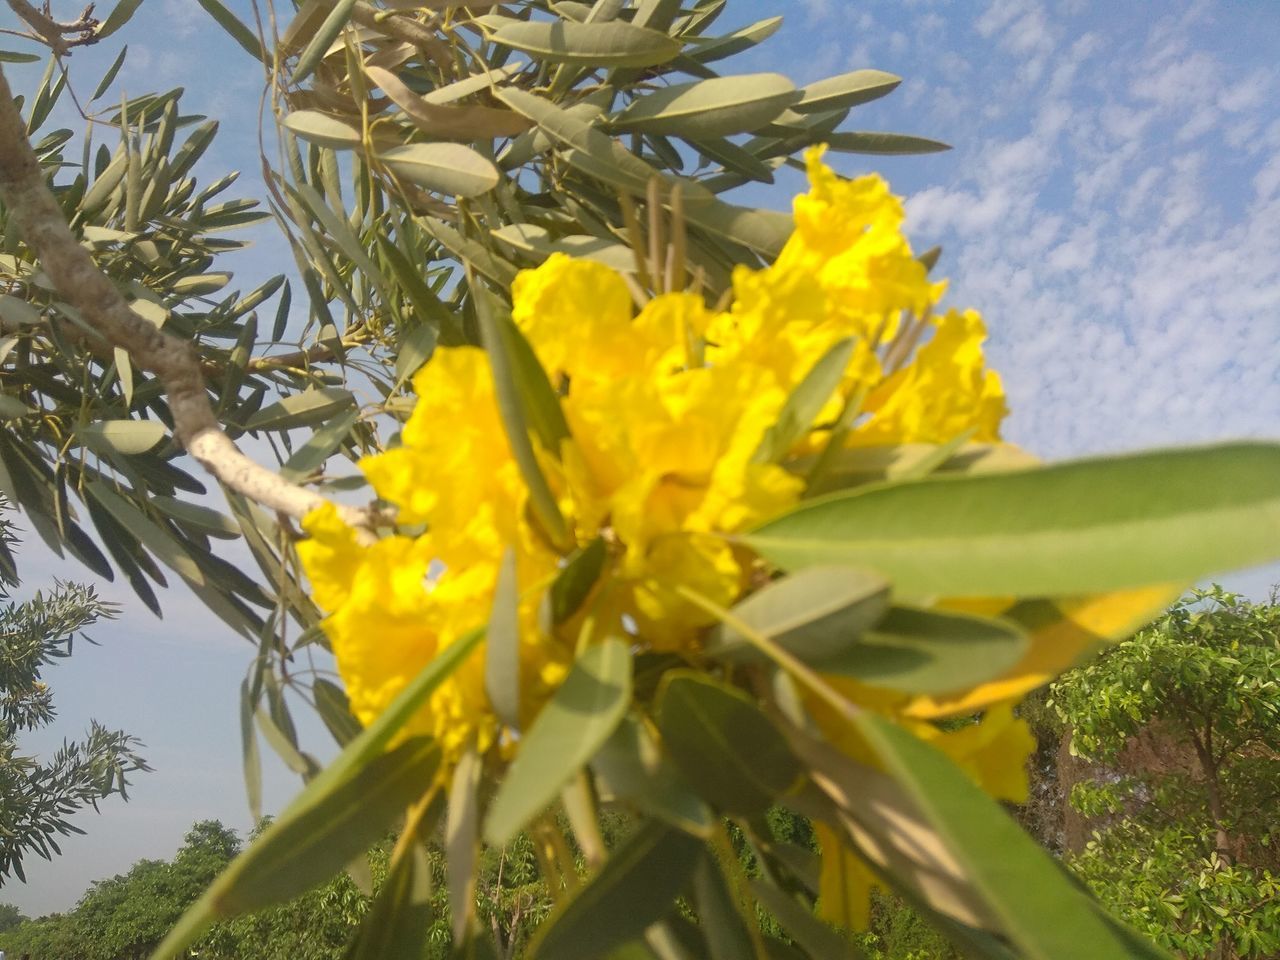 plant, yellow, growth, flower, flowering plant, nature, beauty in nature, tree, freshness, leaf, plant part, sky, no people, produce, close-up, tropical climate, outdoors, day, green, fragility, flower head, food, wildflower, low angle view, sunlight, agriculture, food and drink, palm tree, petal